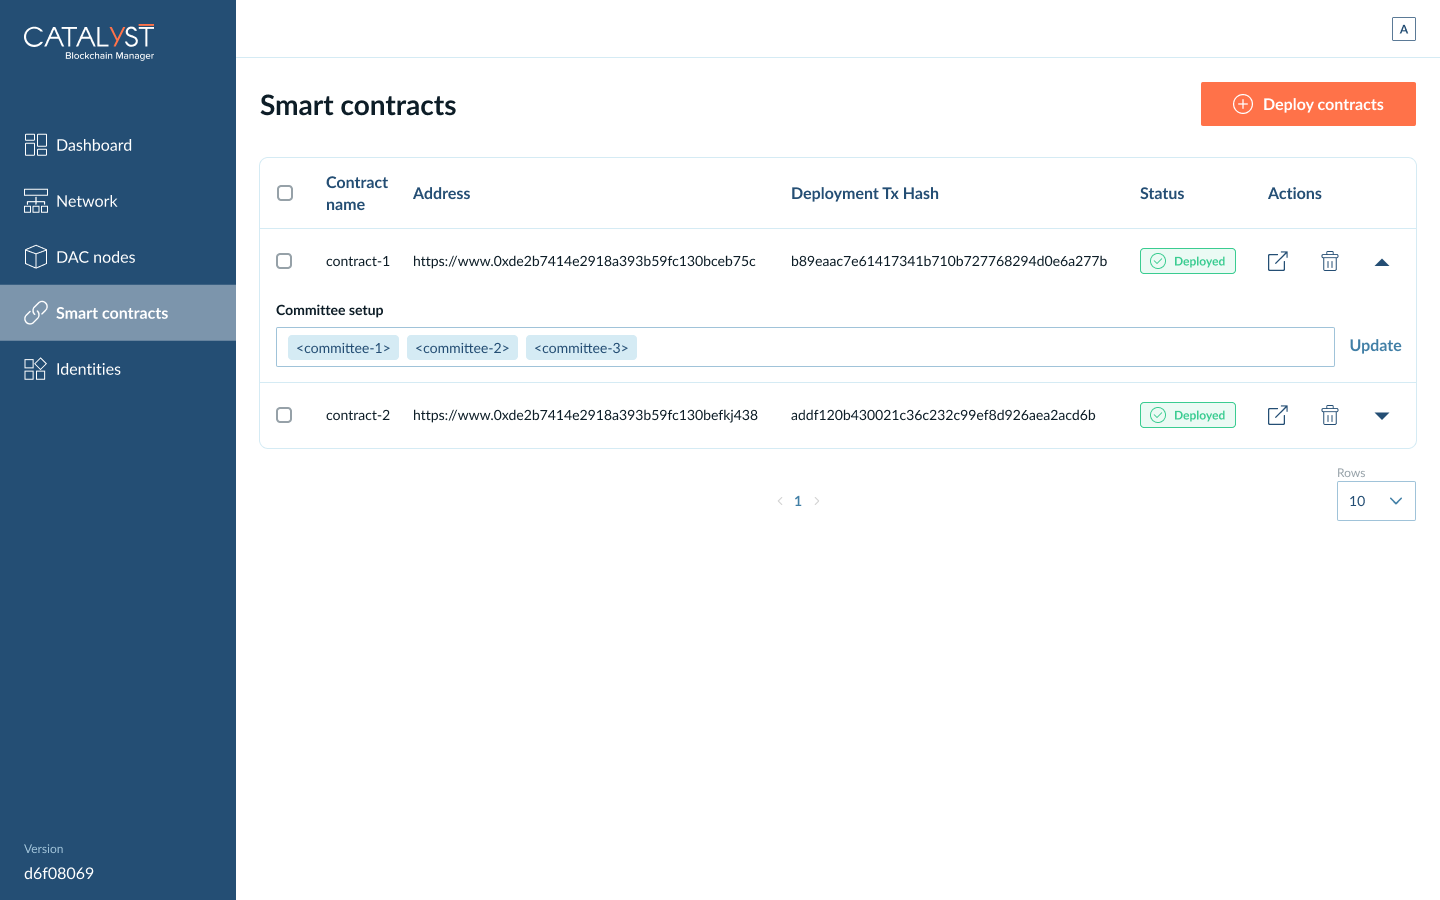 Manage Smart Contracts - Functionalities